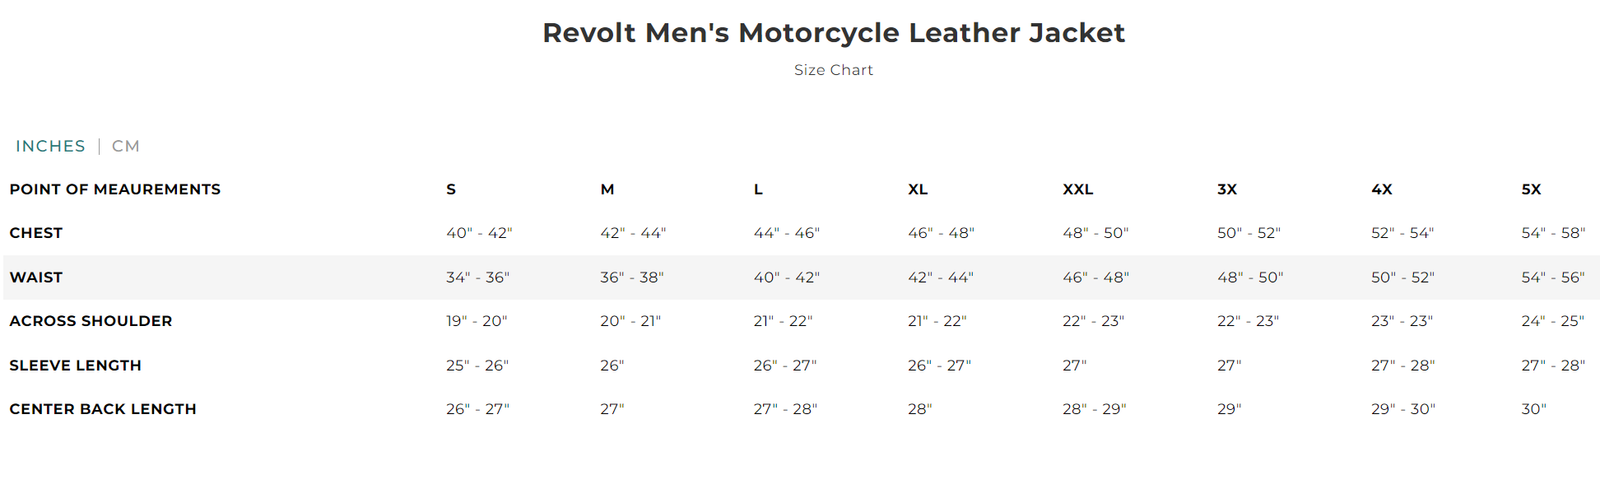 Size chart for men's Revolt leather motorcycle jacket.